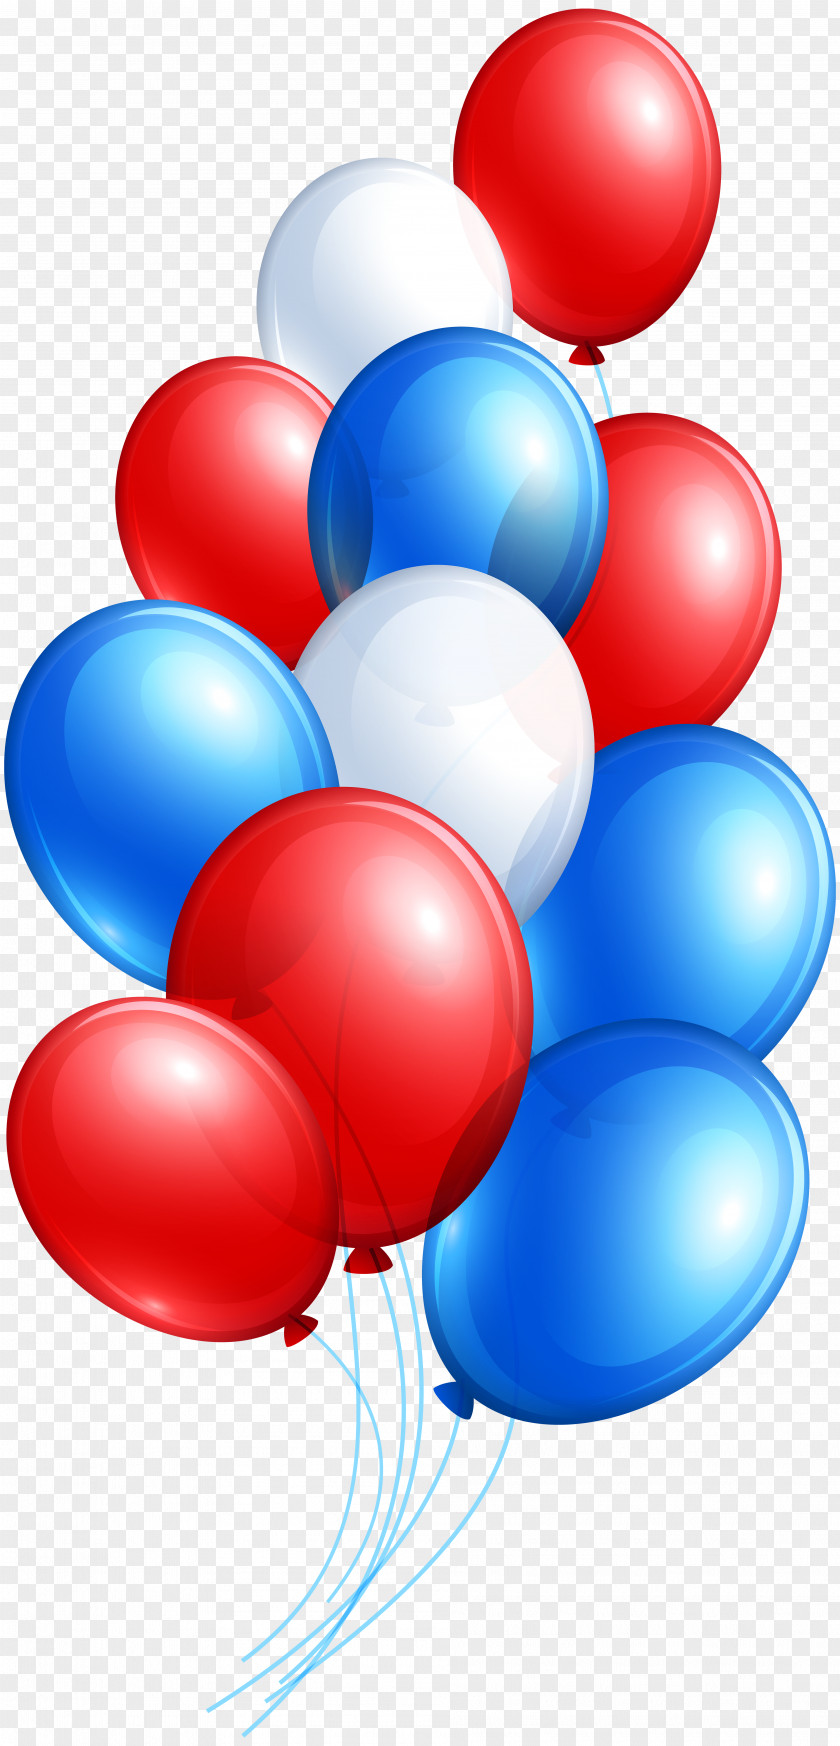 Balloons Independence Day Balloon Clip Art PNG